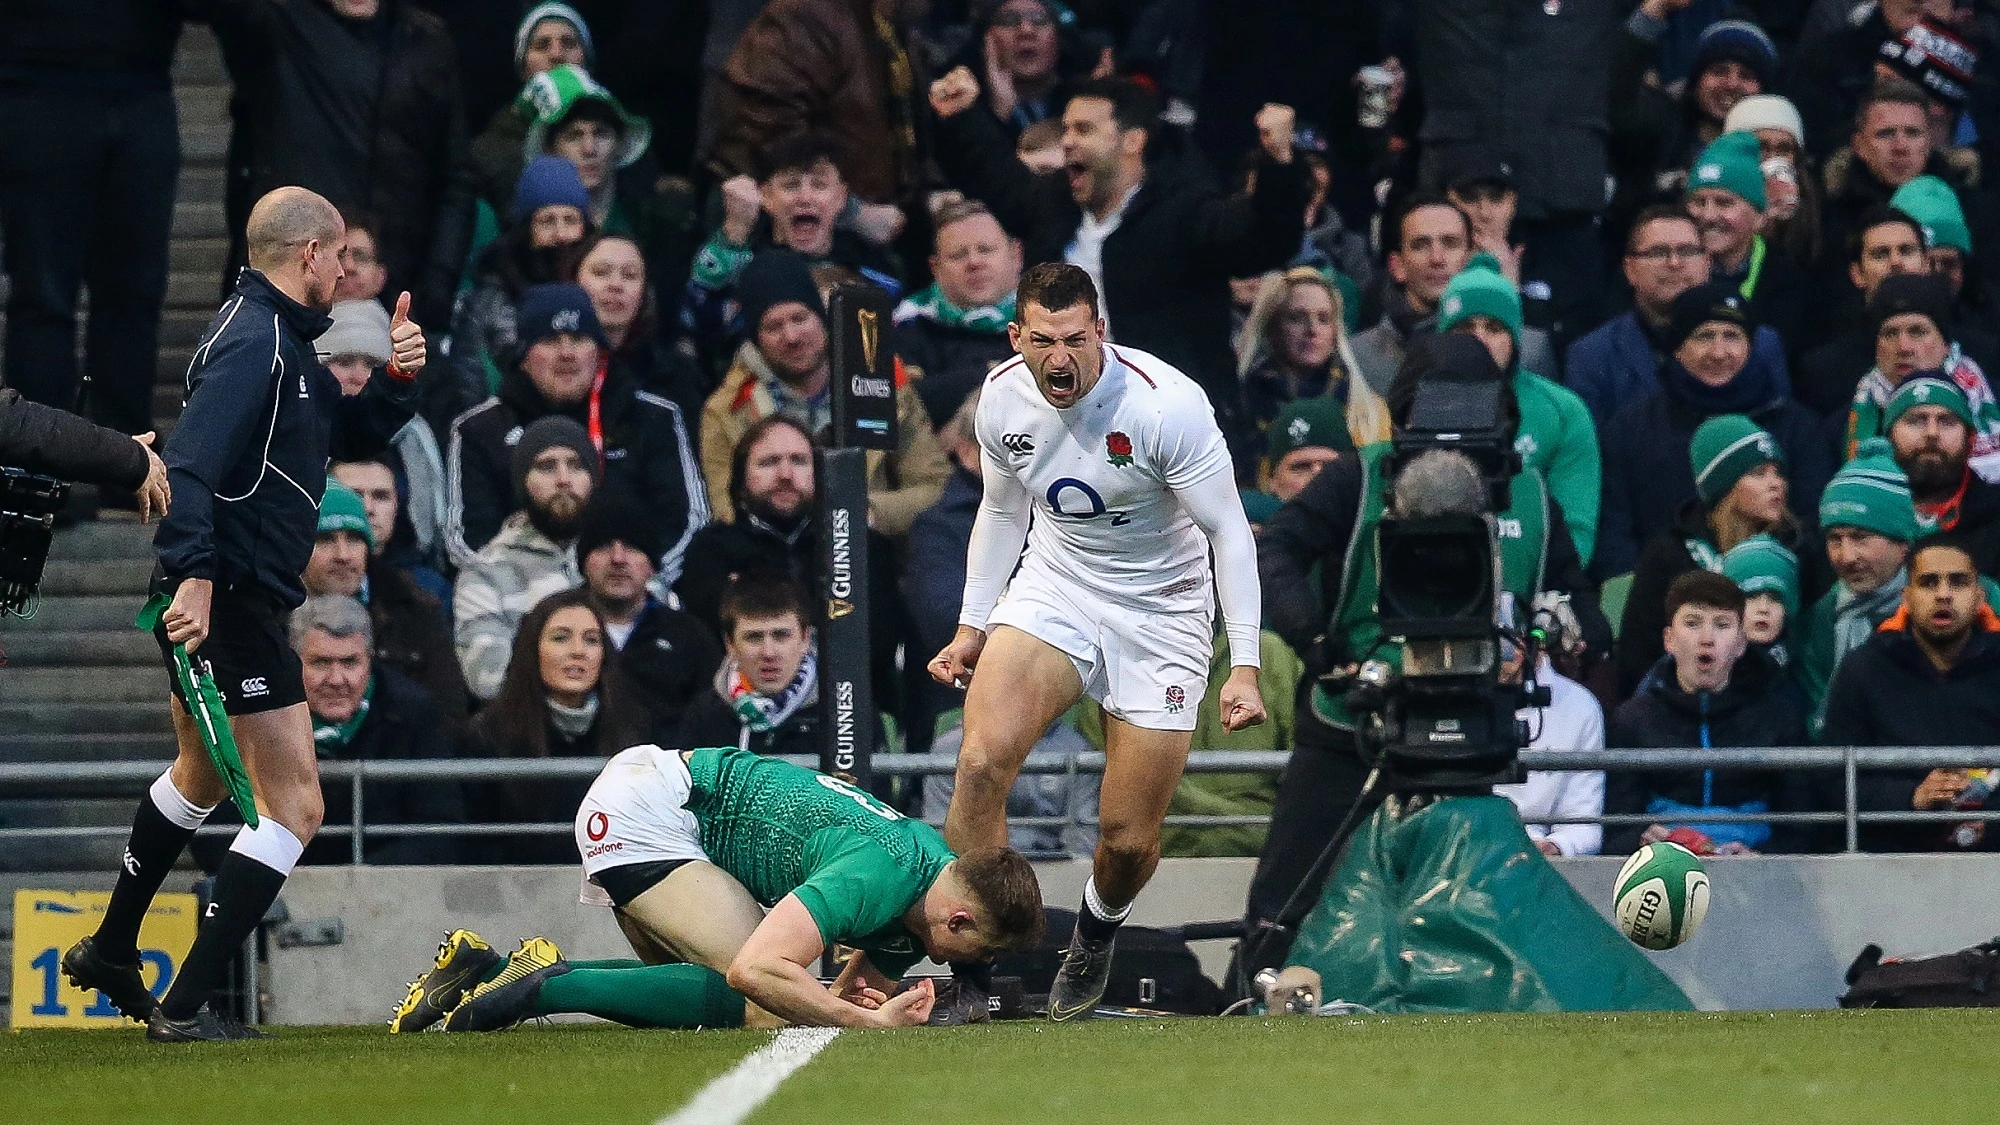 Jonny May celebrates scoring their first try 2/2/2019